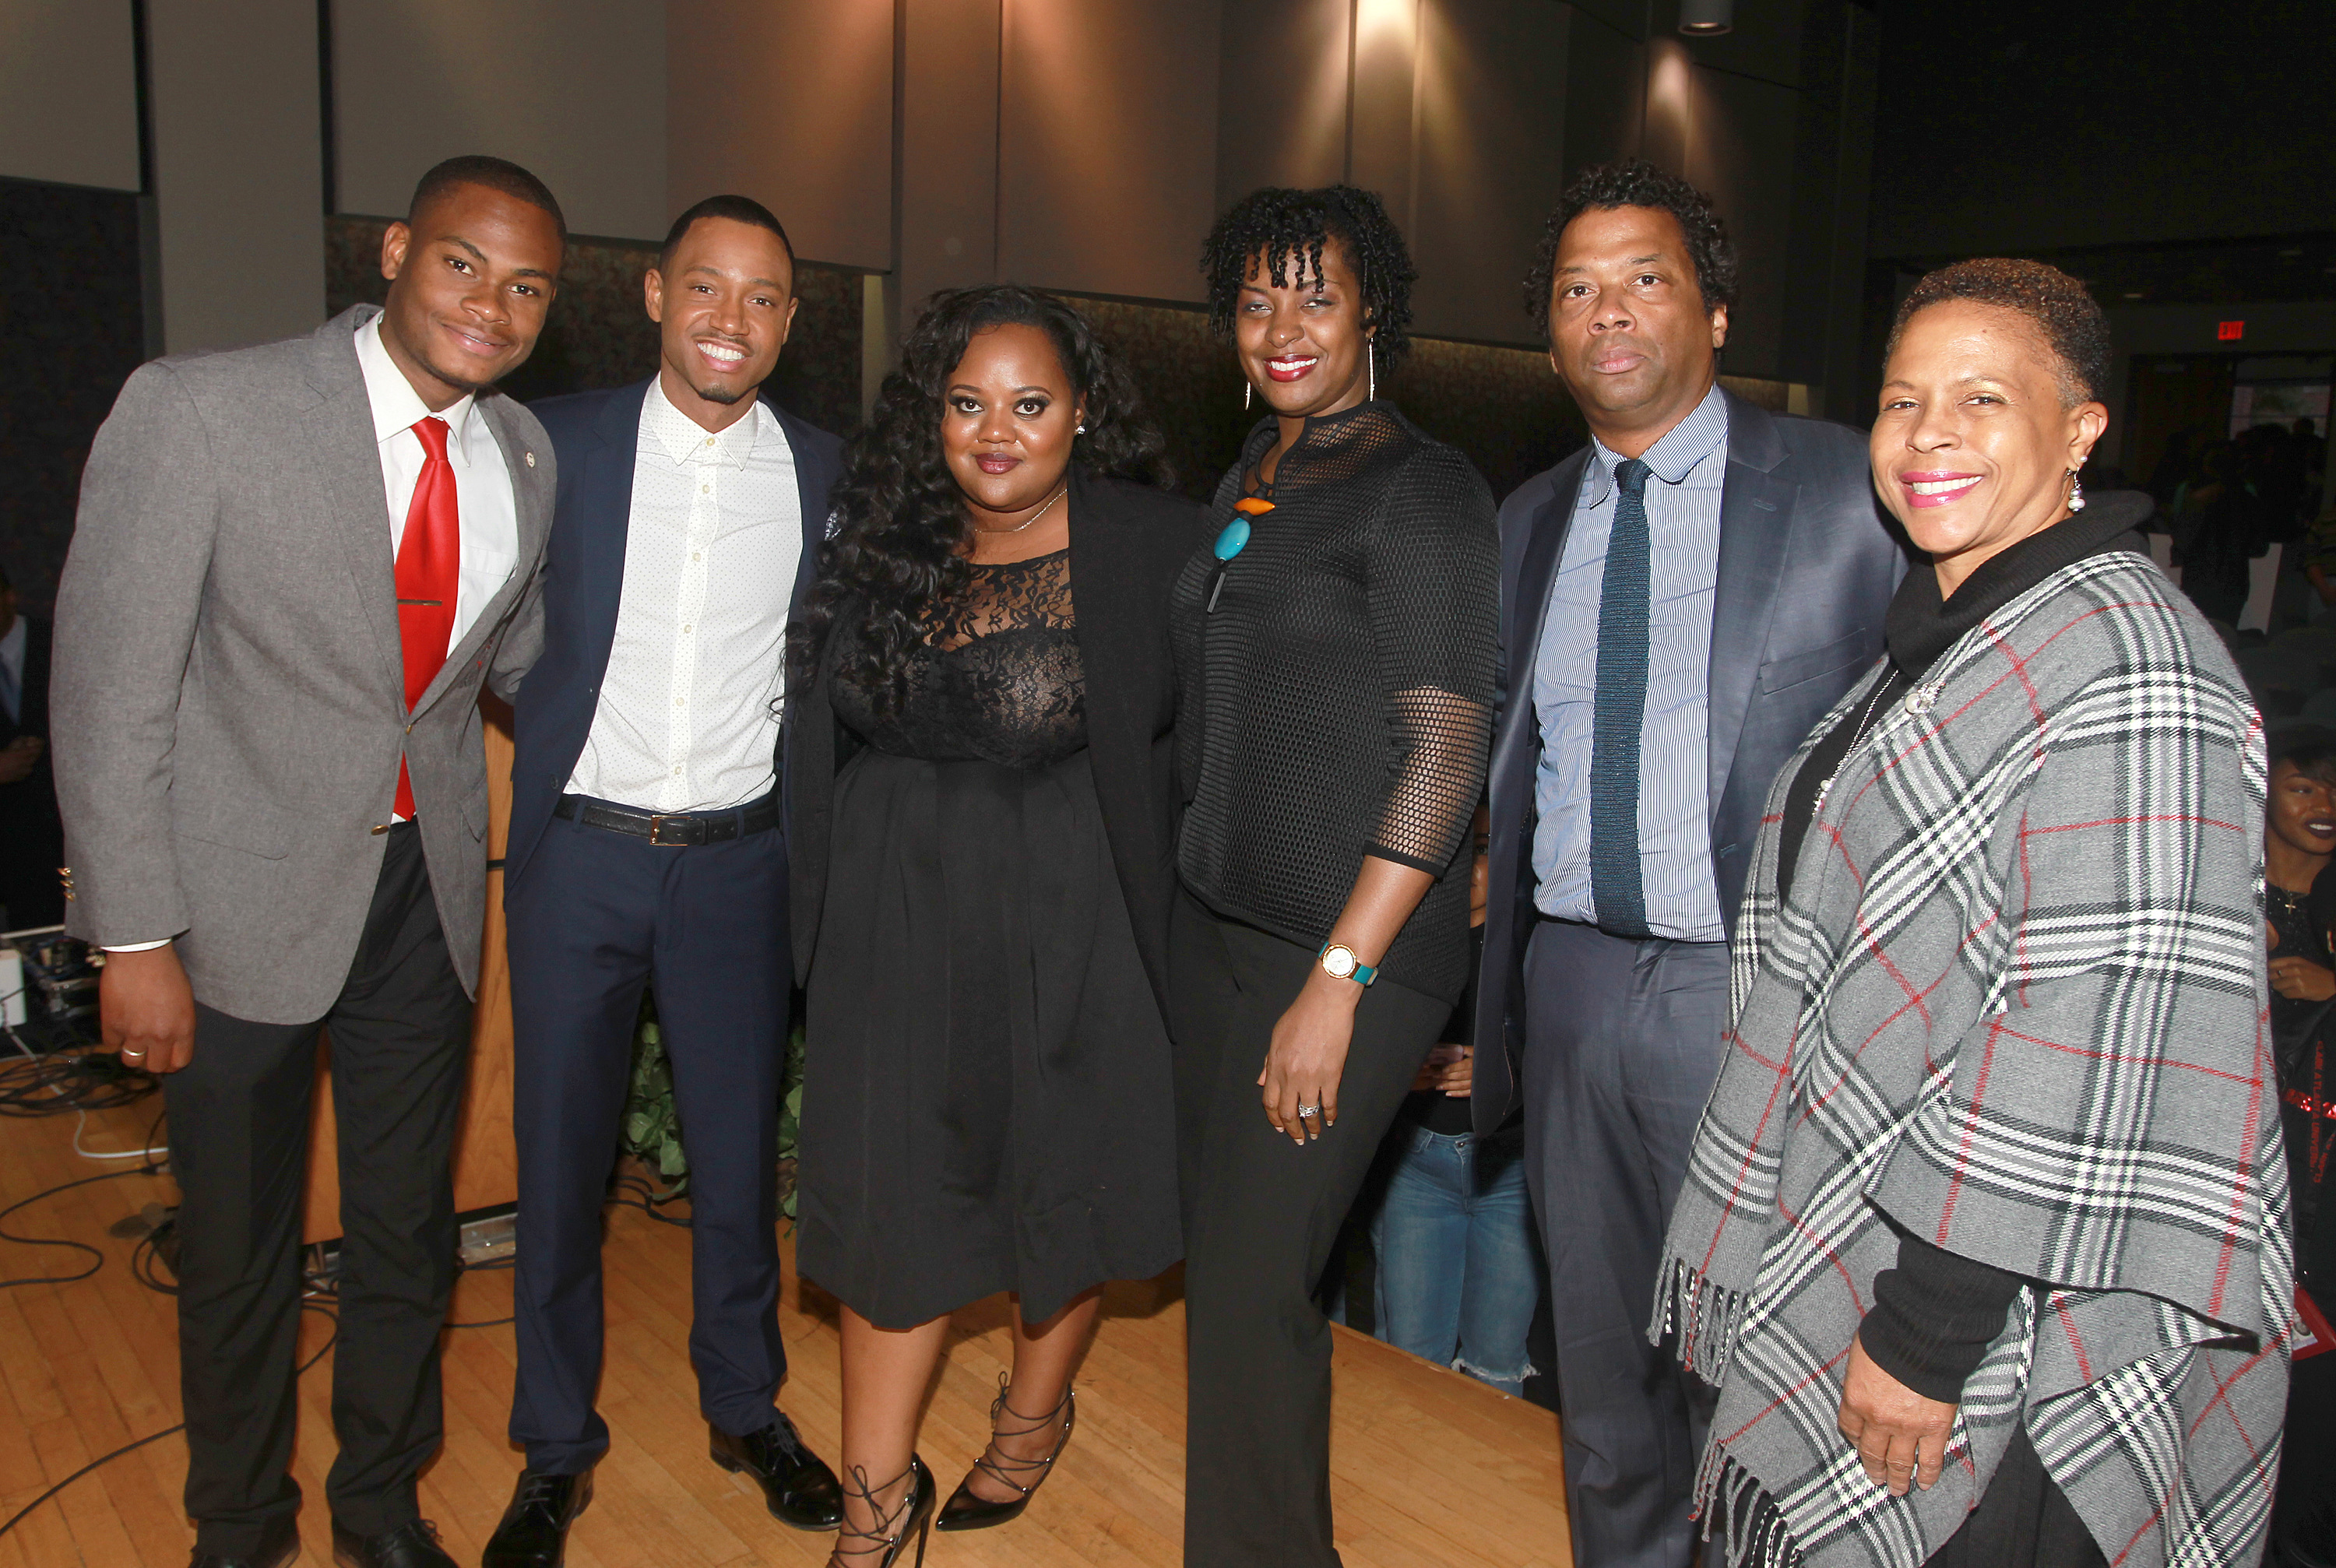 Actor, philanthropist and HBCU alumni Terrence ‘J’ Jenkins, second from the left, is joined by Clark Atlanta University student Adrain Artary, first left, along with event panelists Natasha Eubanks, Founder and CEO, TheYBF.com; Lisa Frison, Vice President, African American segment manager, Wells Fargo; and Richard Shropshire, Vice President of Branding, Marketing and Communications, United Negro College Fund (UNCF) along with the Dean of Students of Clark Atlanta University, Ernita Hemmitt at the Wells Fargo My Life, My Story, #MyUntold℠ Town Hall on November 10, 2105 for students at Clark Atlanta University, Morehouse College and Spelman College in Atlanta, GA. (Photo by Donald Trail/Invision for Wells Fargo/AP Images)